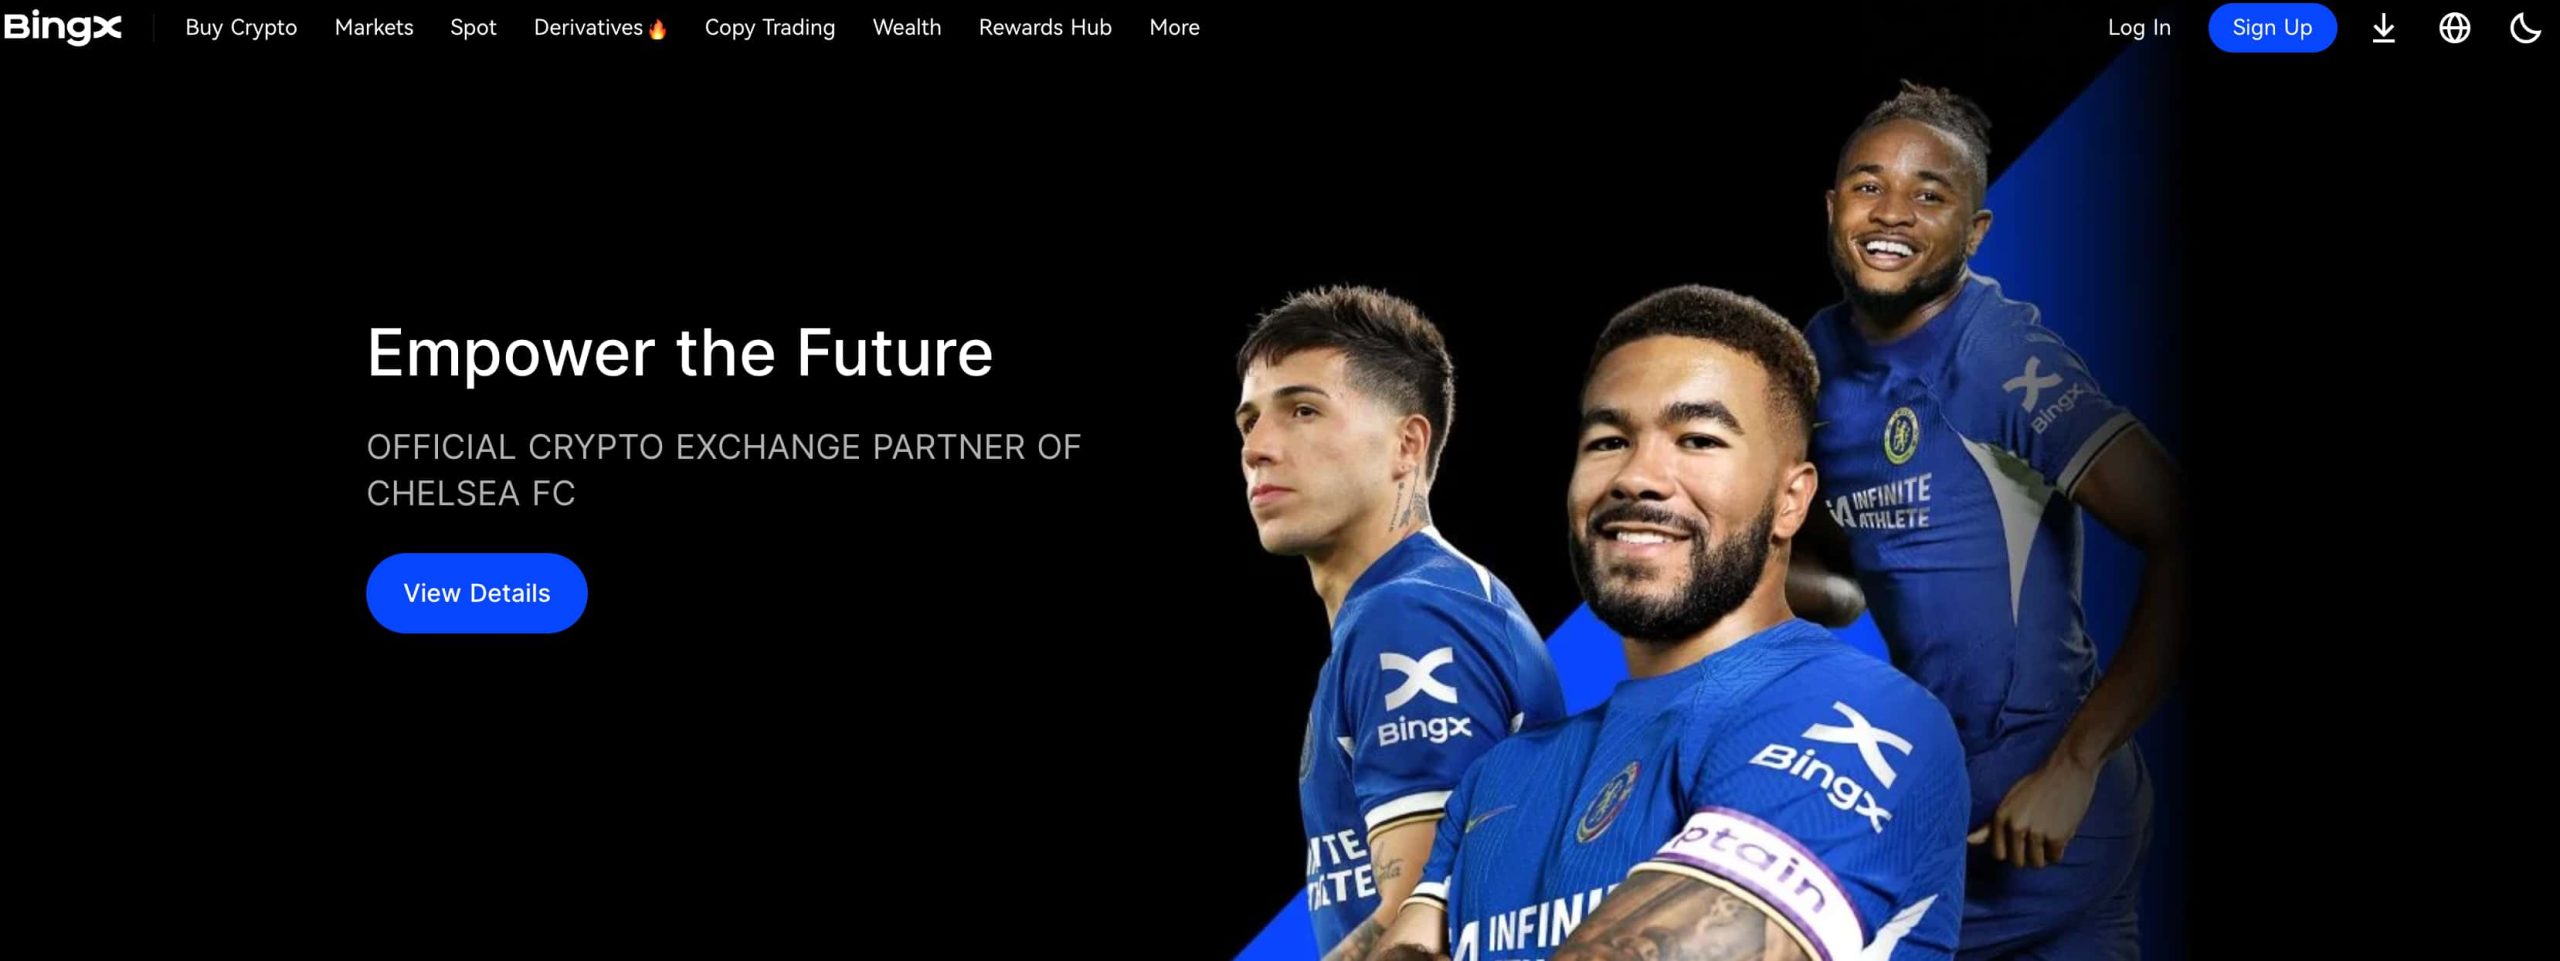 BingX Landing page for Crypto exchange with Chelsea players